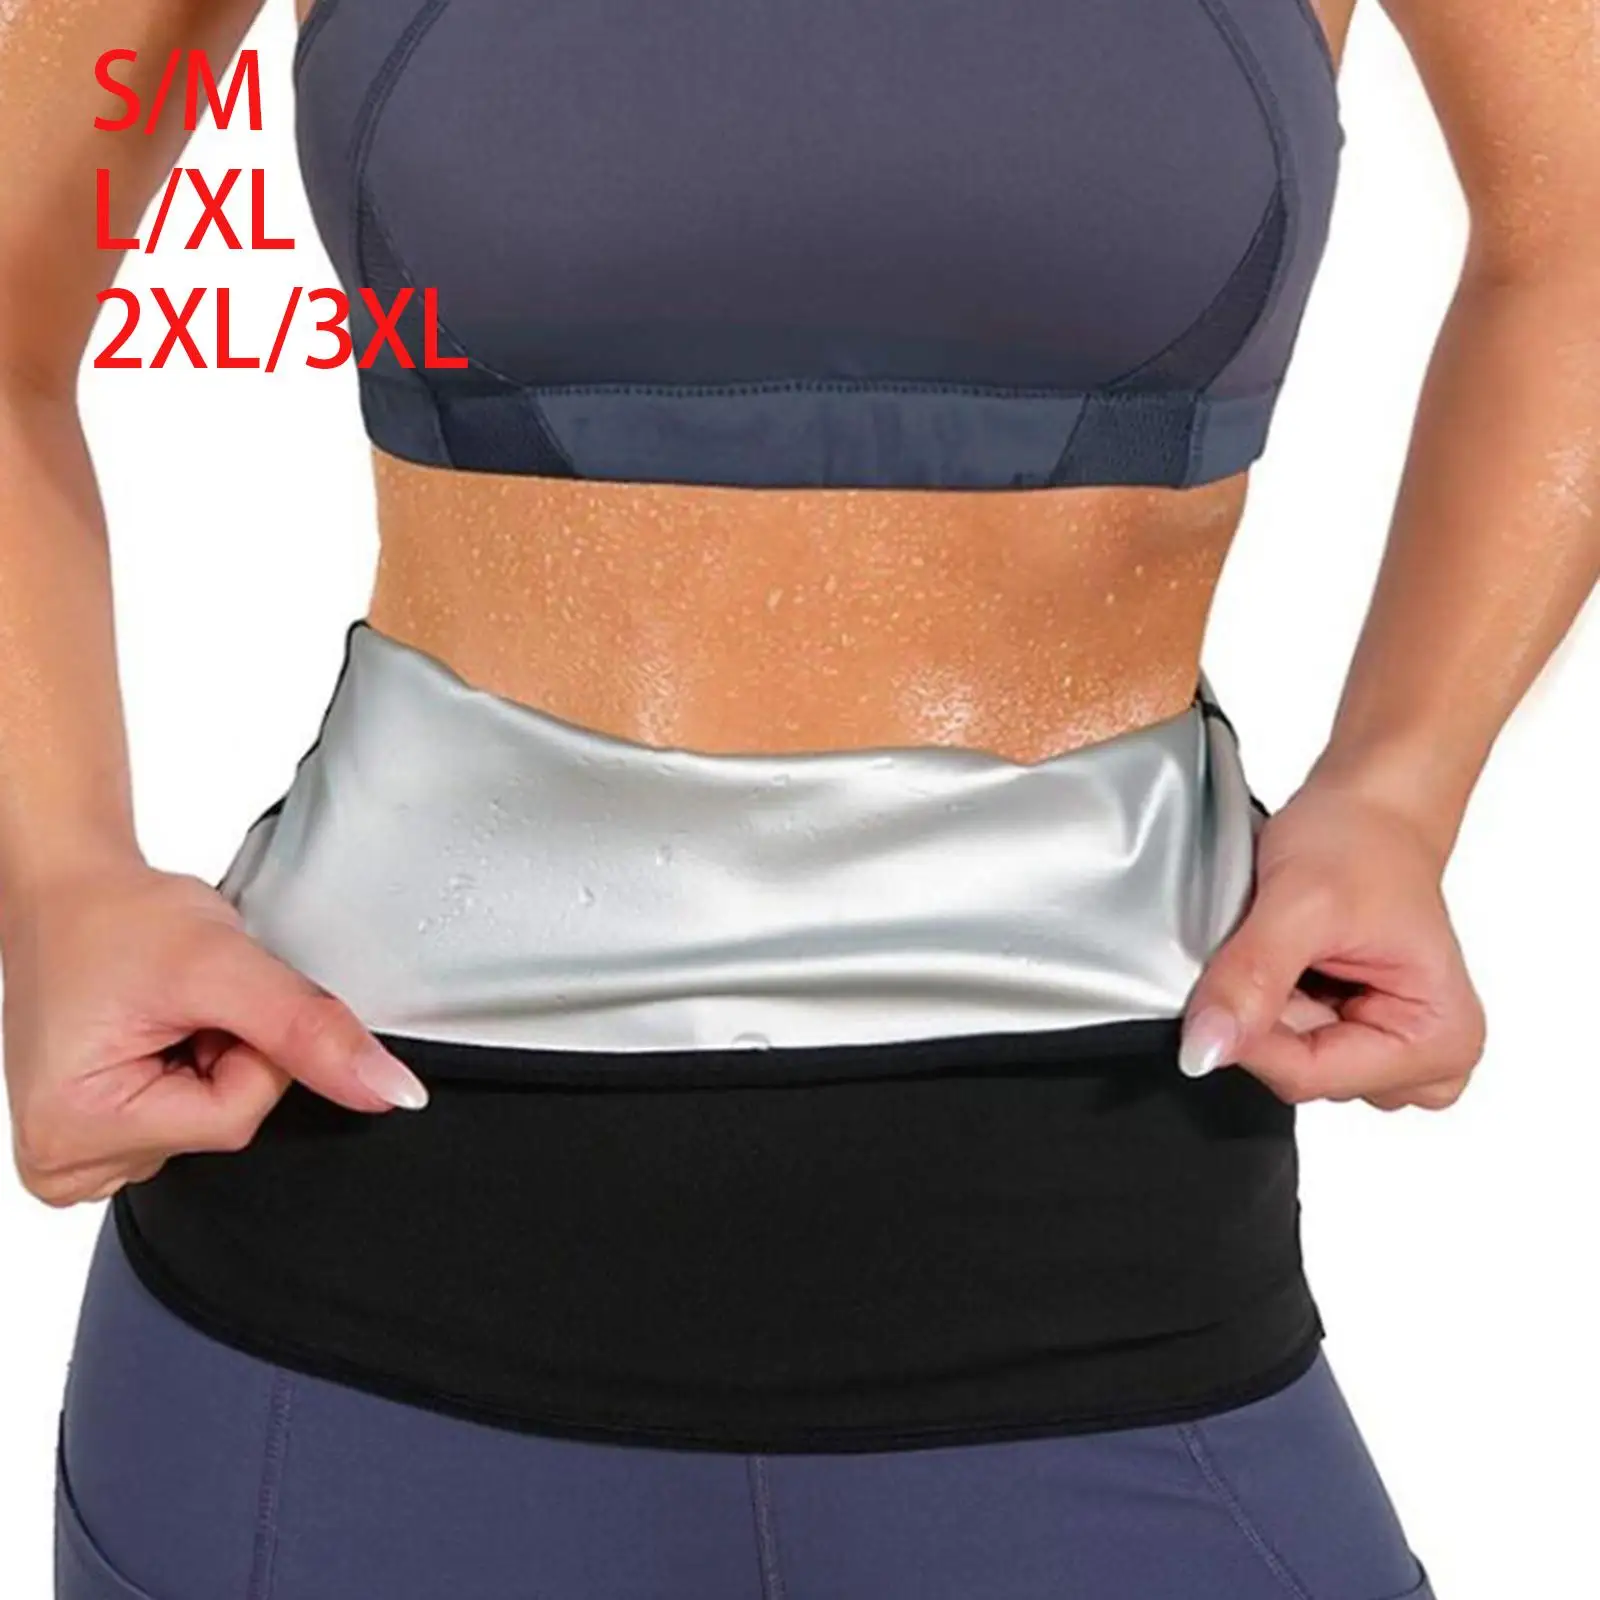 Sweat Waist Trimmer Shapewear for Running Exercise Indoor Outdoor